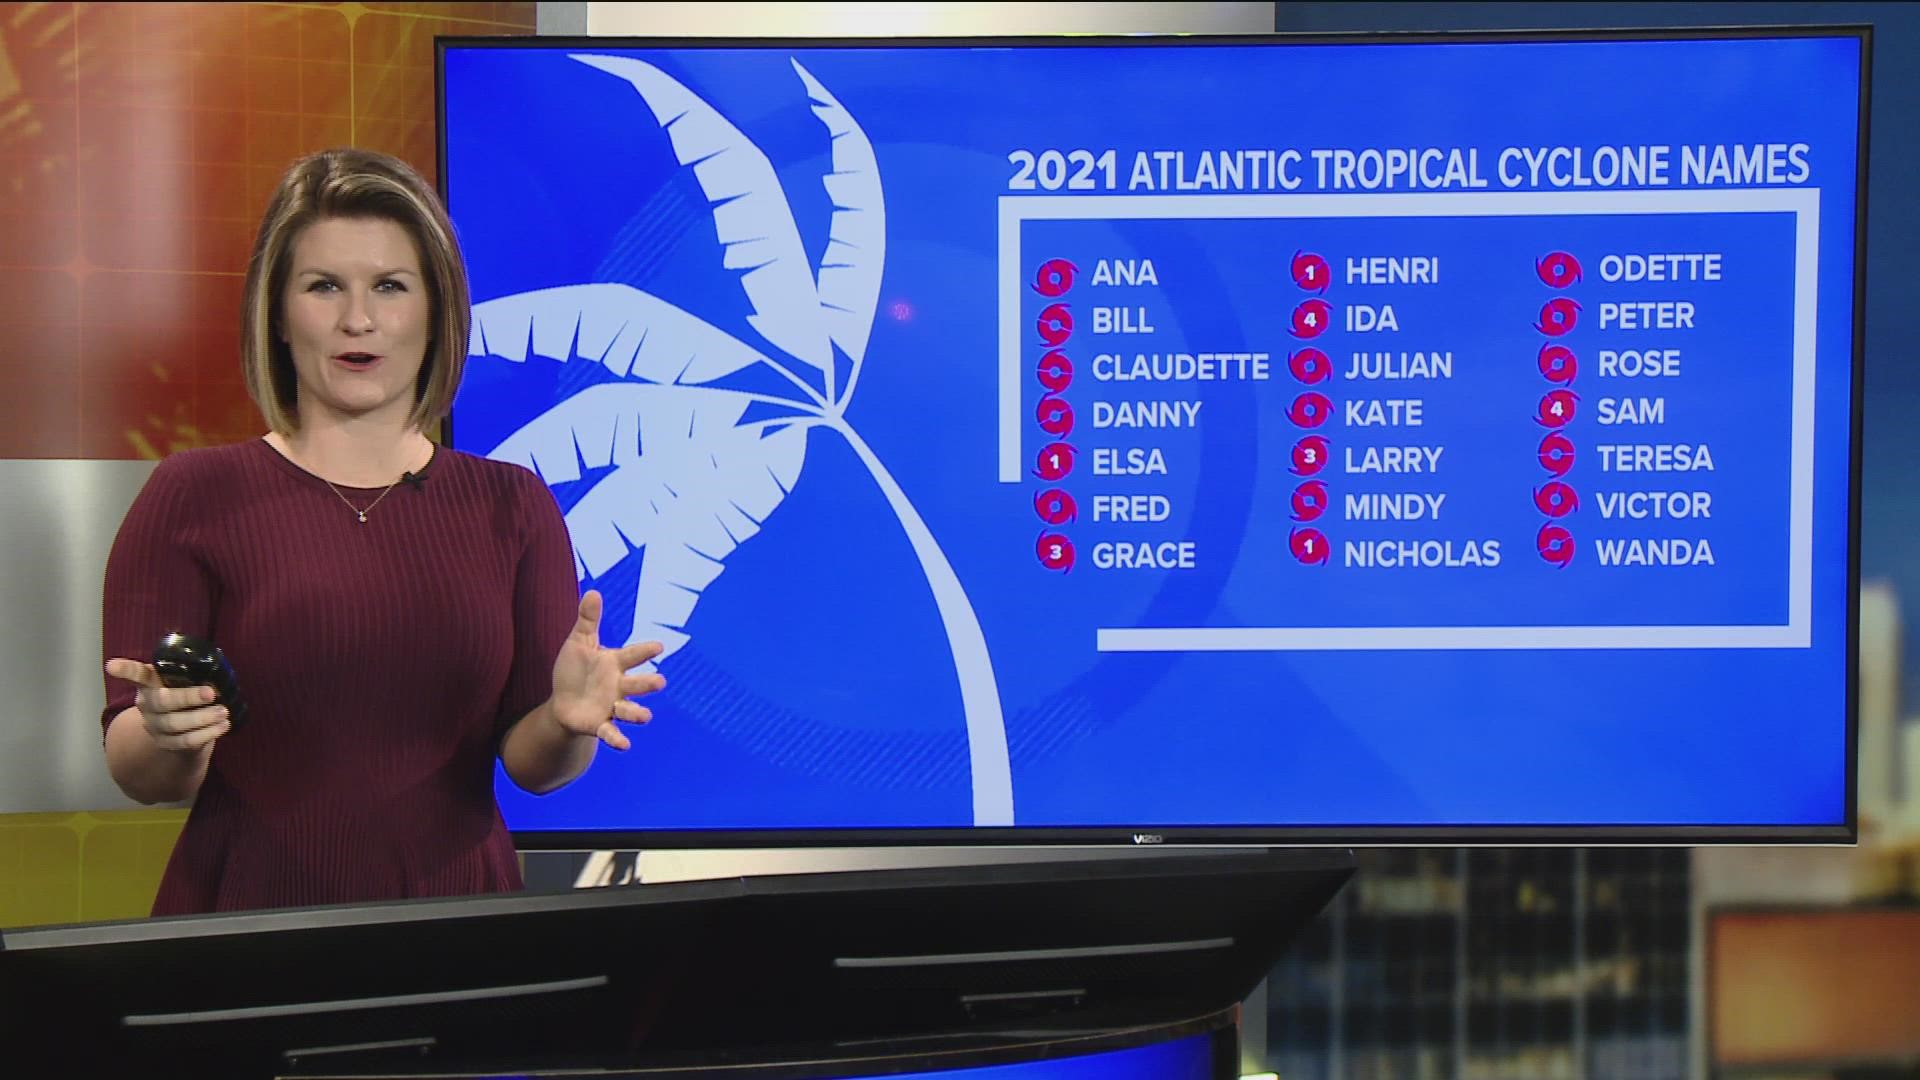 The 2021 Atlantic hurricane season used up all 21 names on the list with four storms becoming major hurricanes.